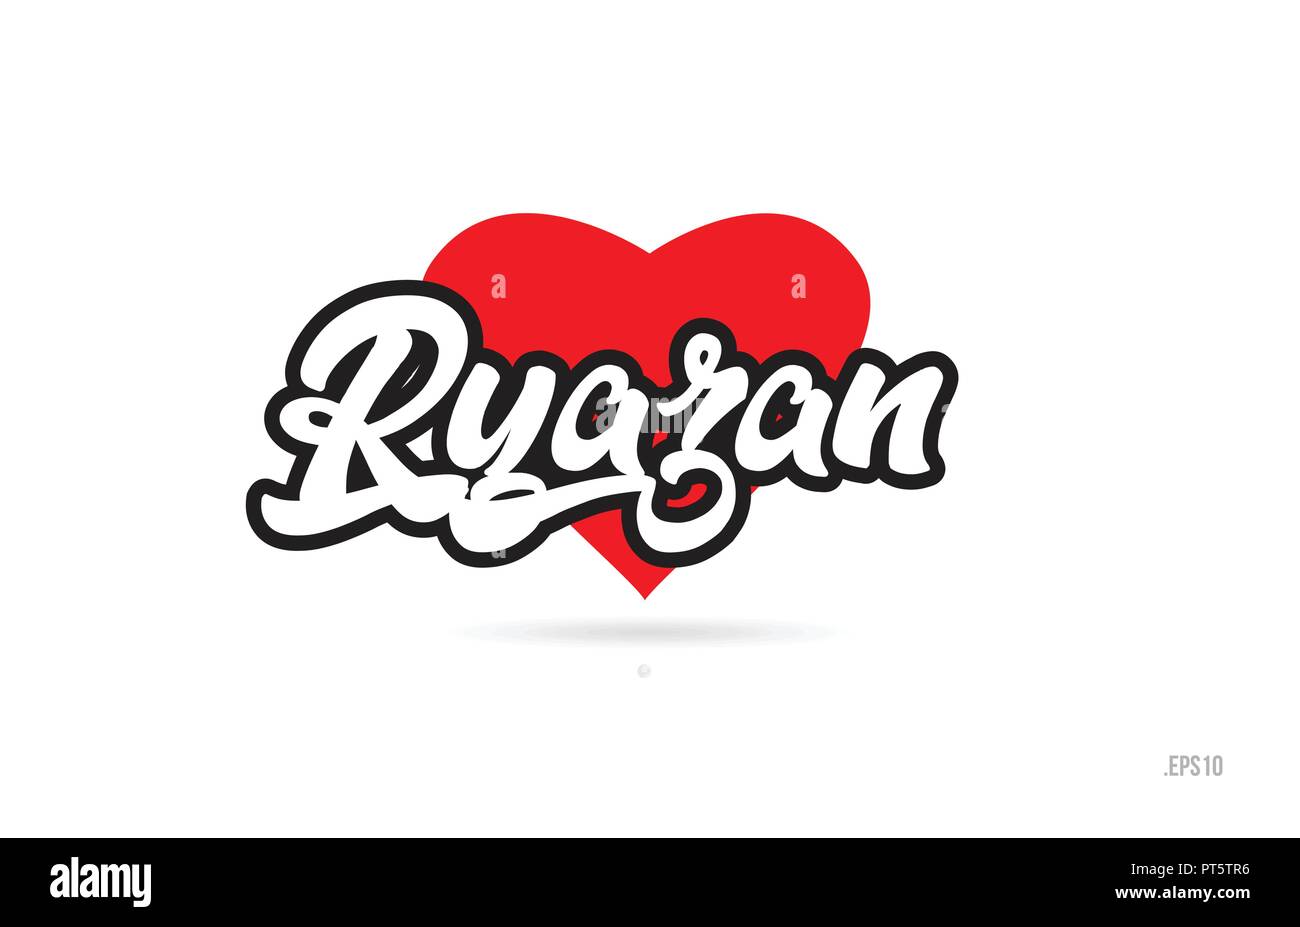 ryazan city text design with red heart typographic icon design suitable for touristic promotion Stock Vector